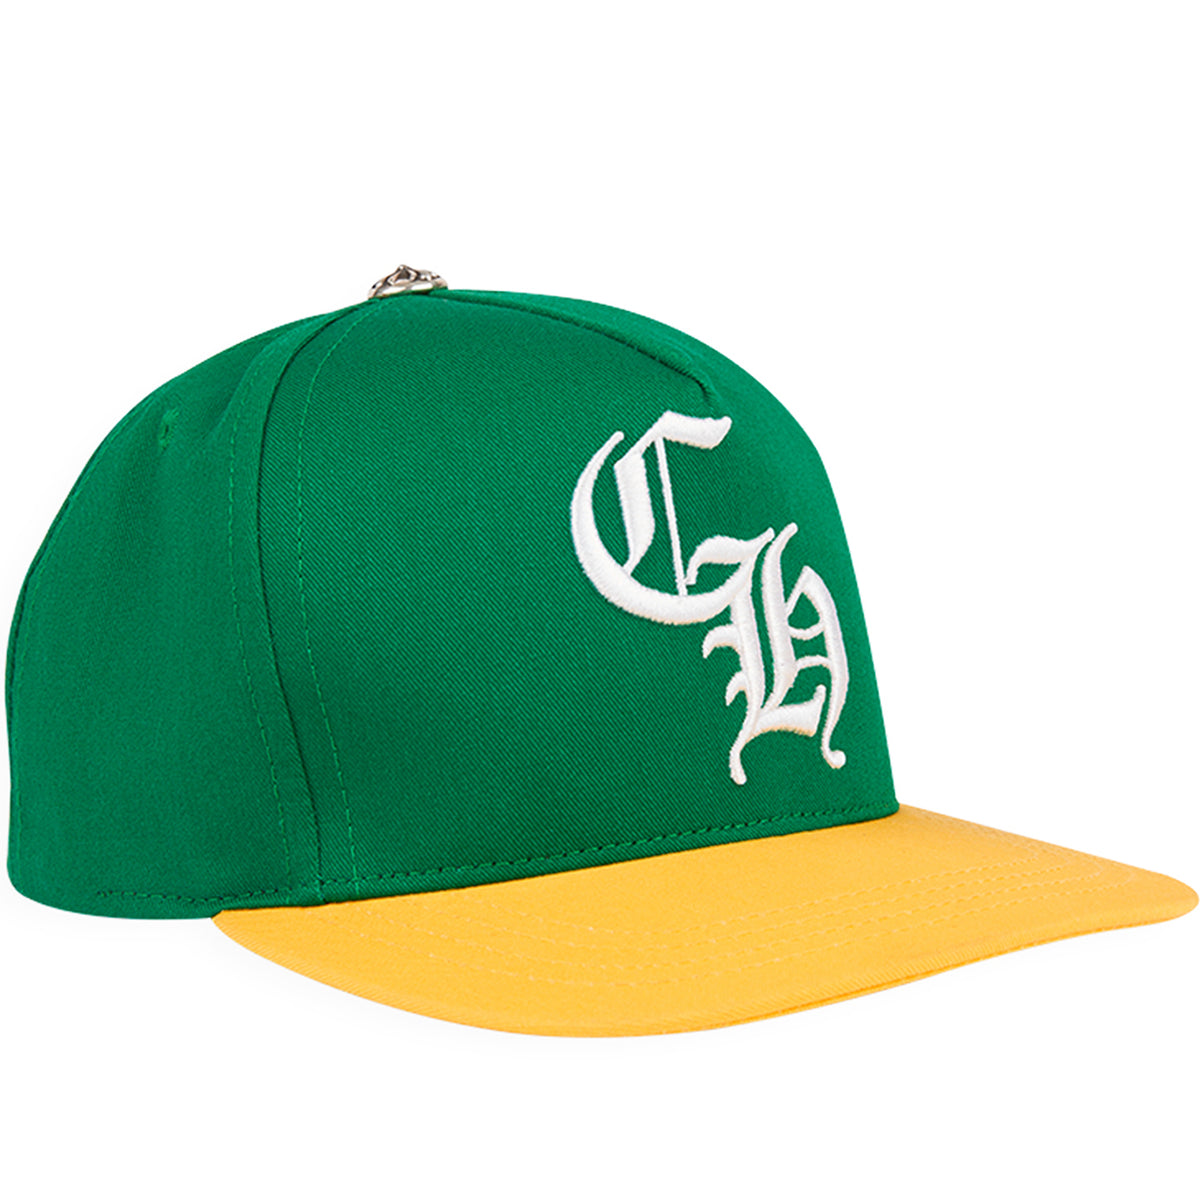 CHROME HEARTS OAKLAND A'S EXCLUSIVE SNAPBACK – OBTAIND